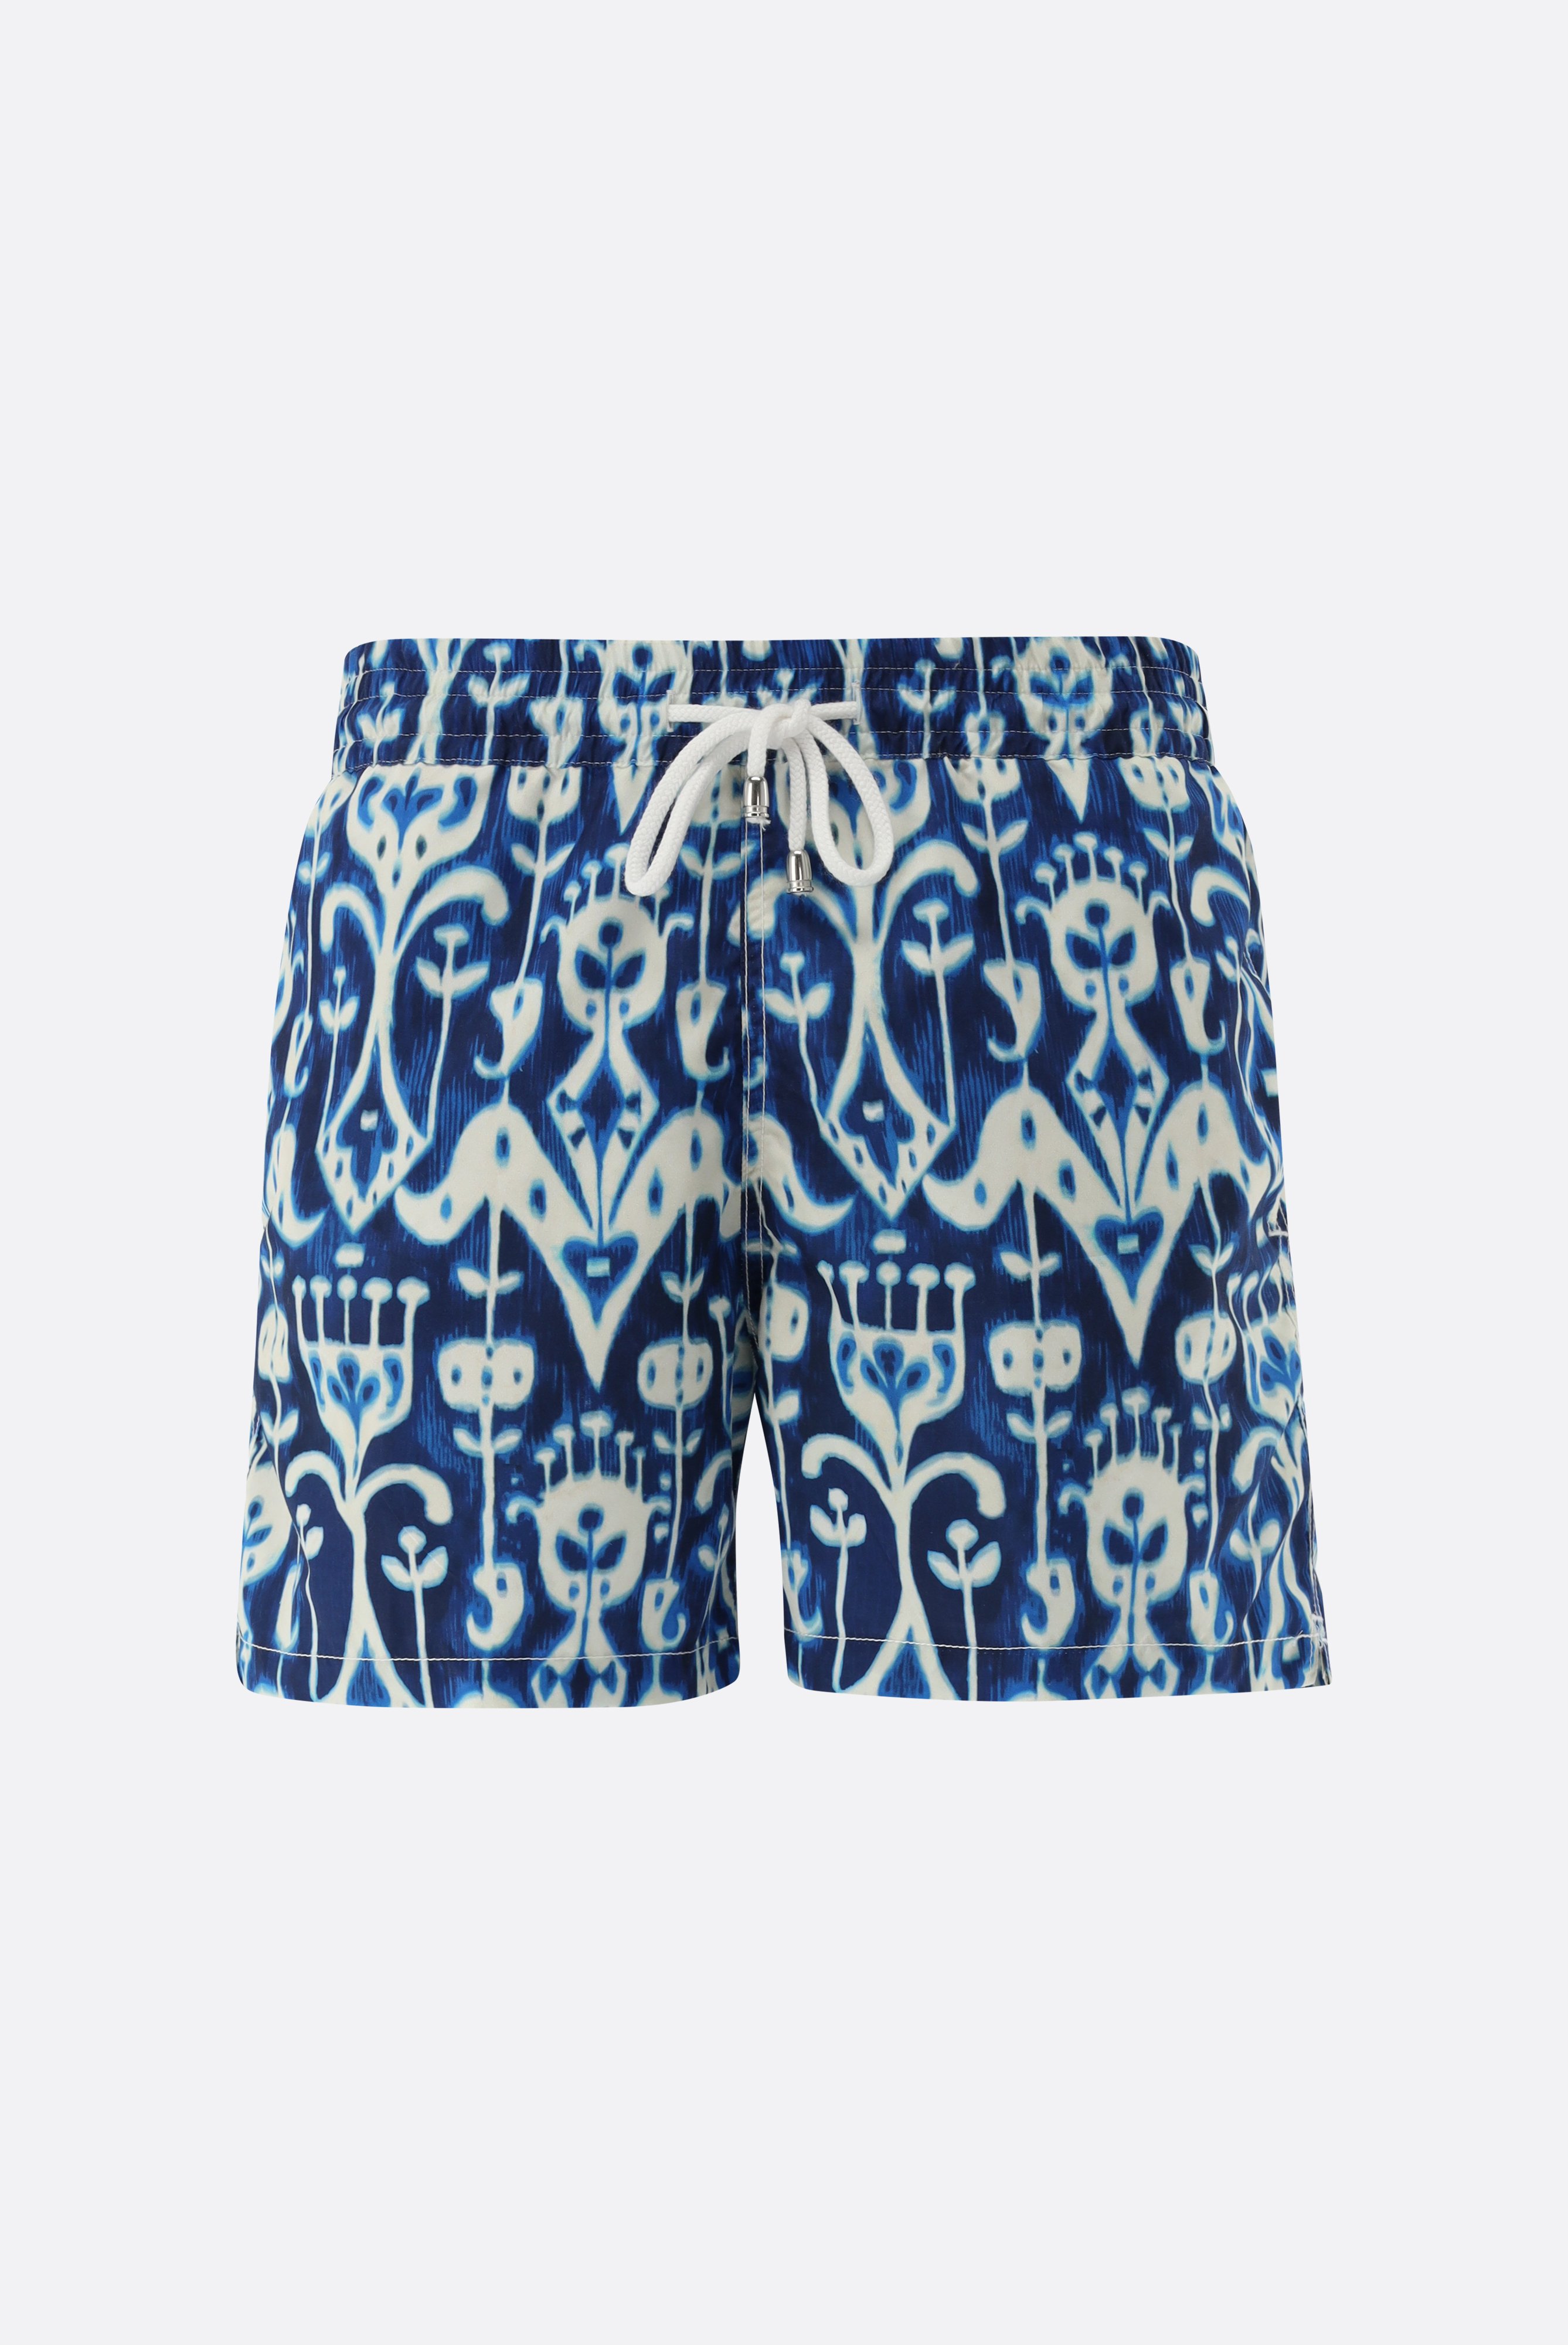 Swimshorts with Print